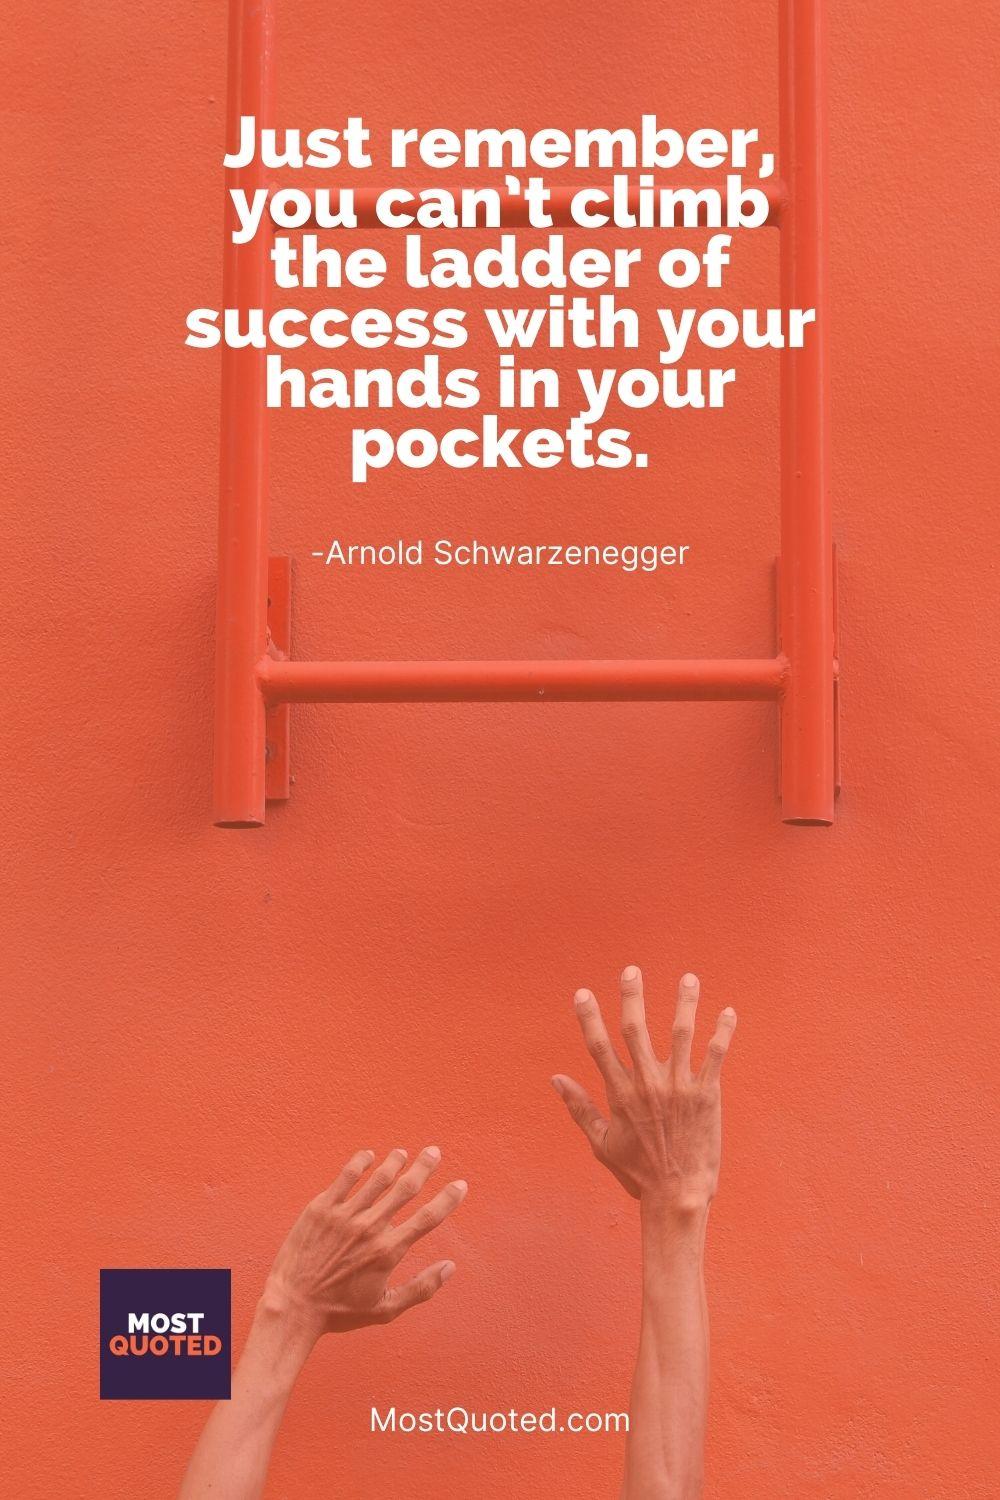 Just remember, you can’t climb the ladder of success with your hands in your pockets. - Arnold Schwarzenegger